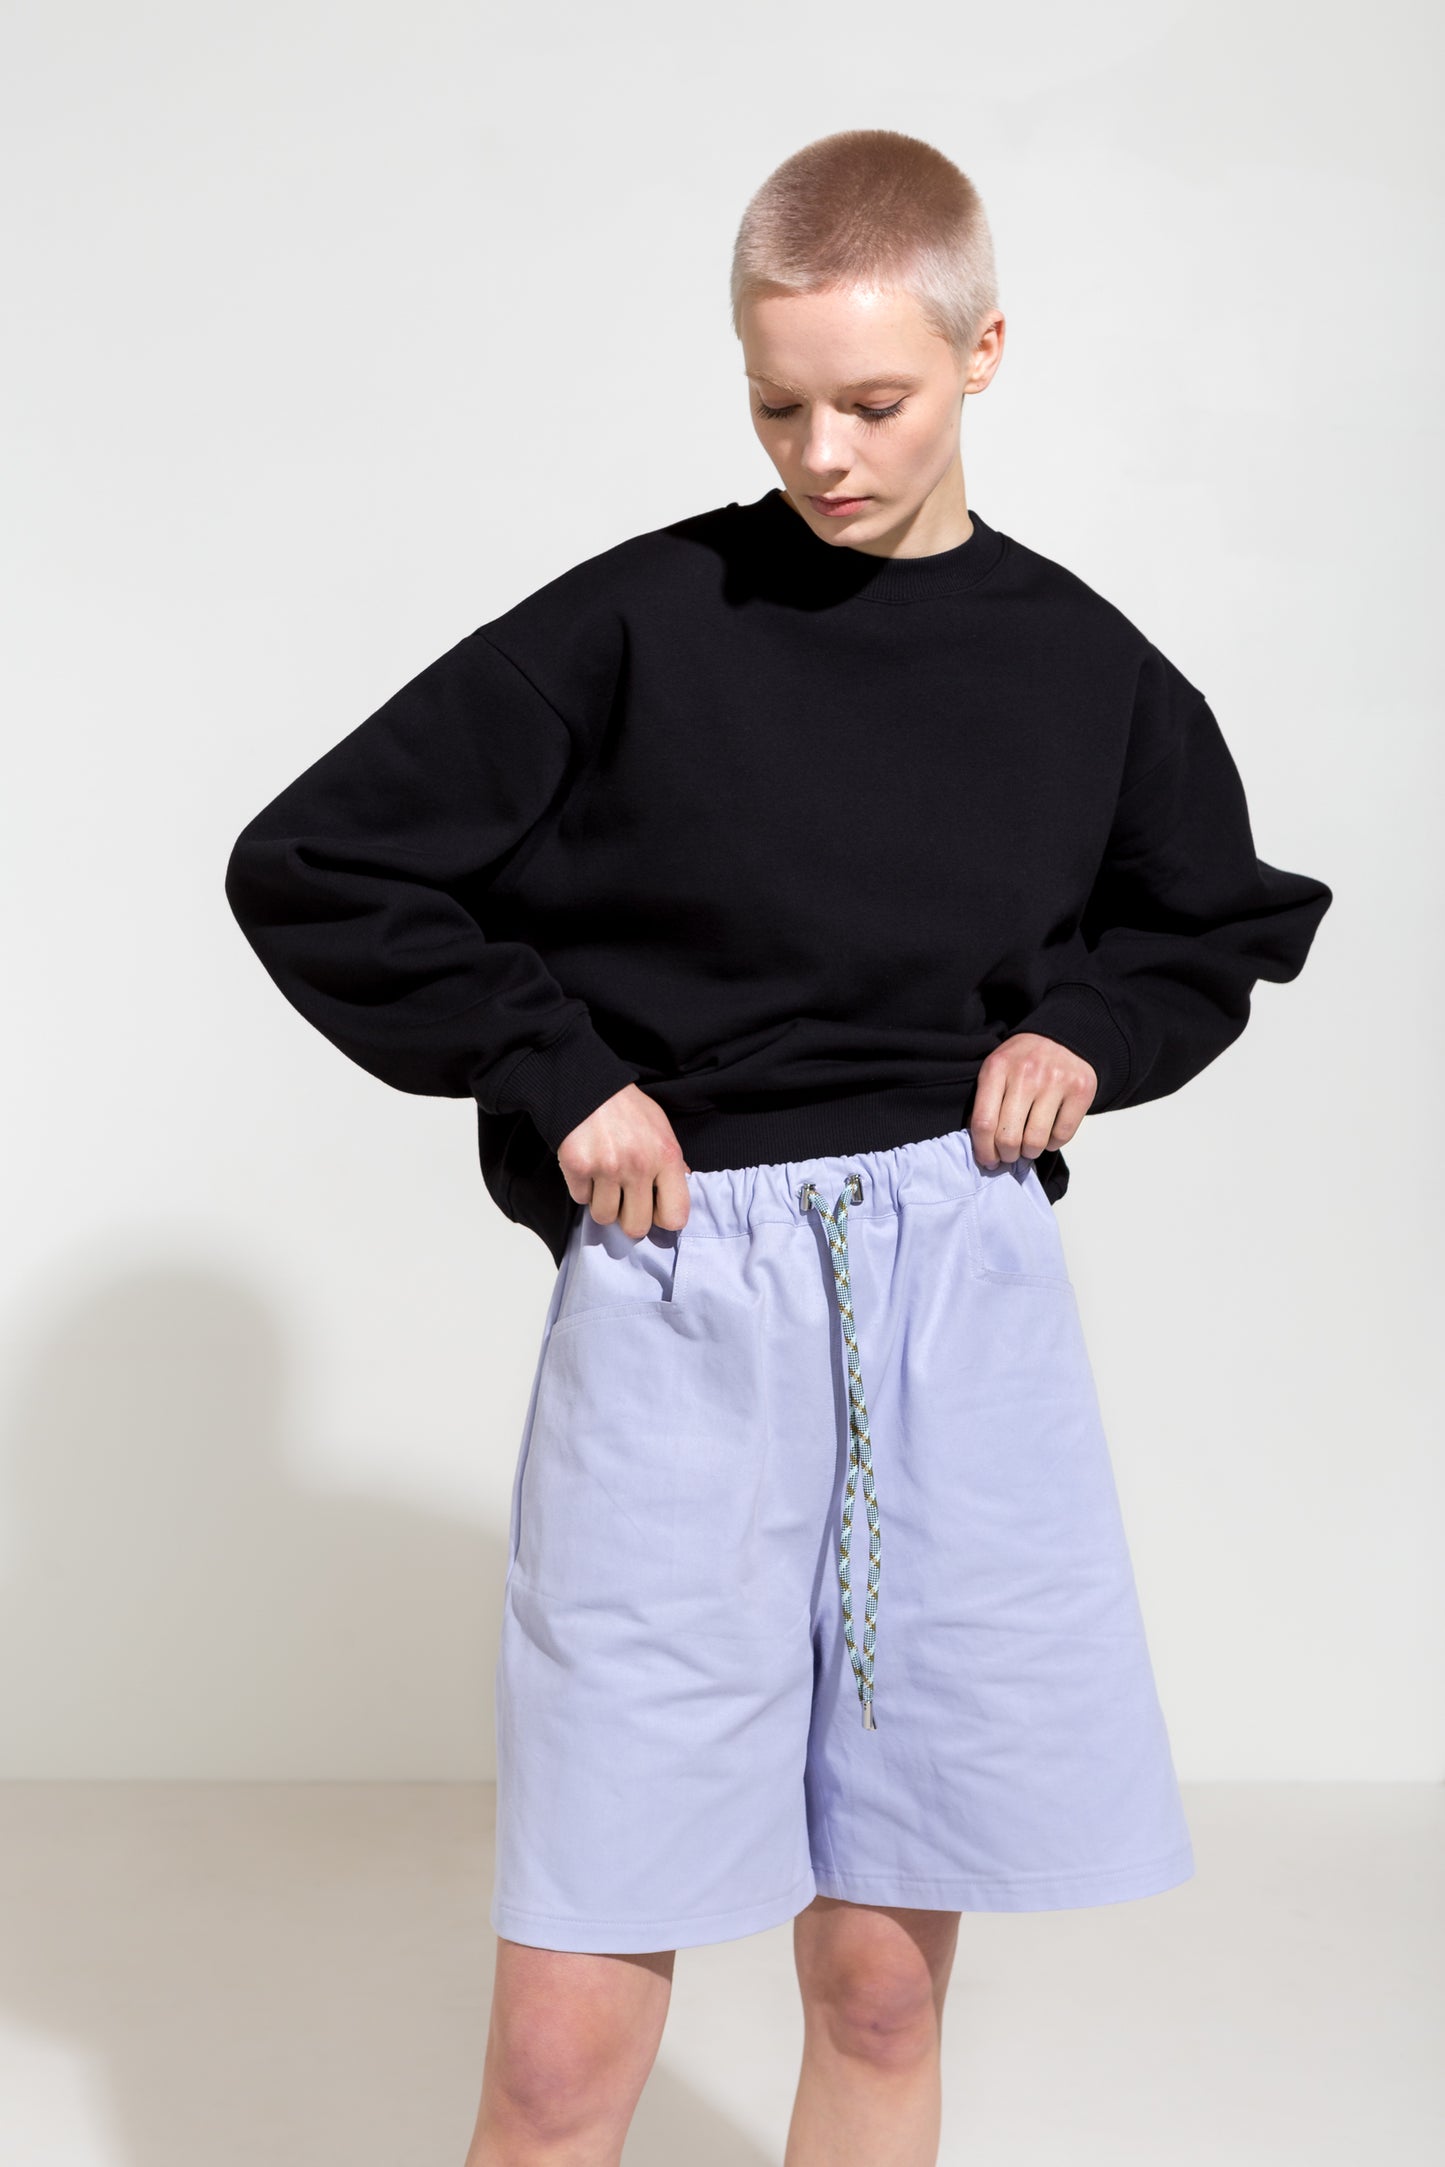 Relaxed fit twill shorts and black organic sweatshirt